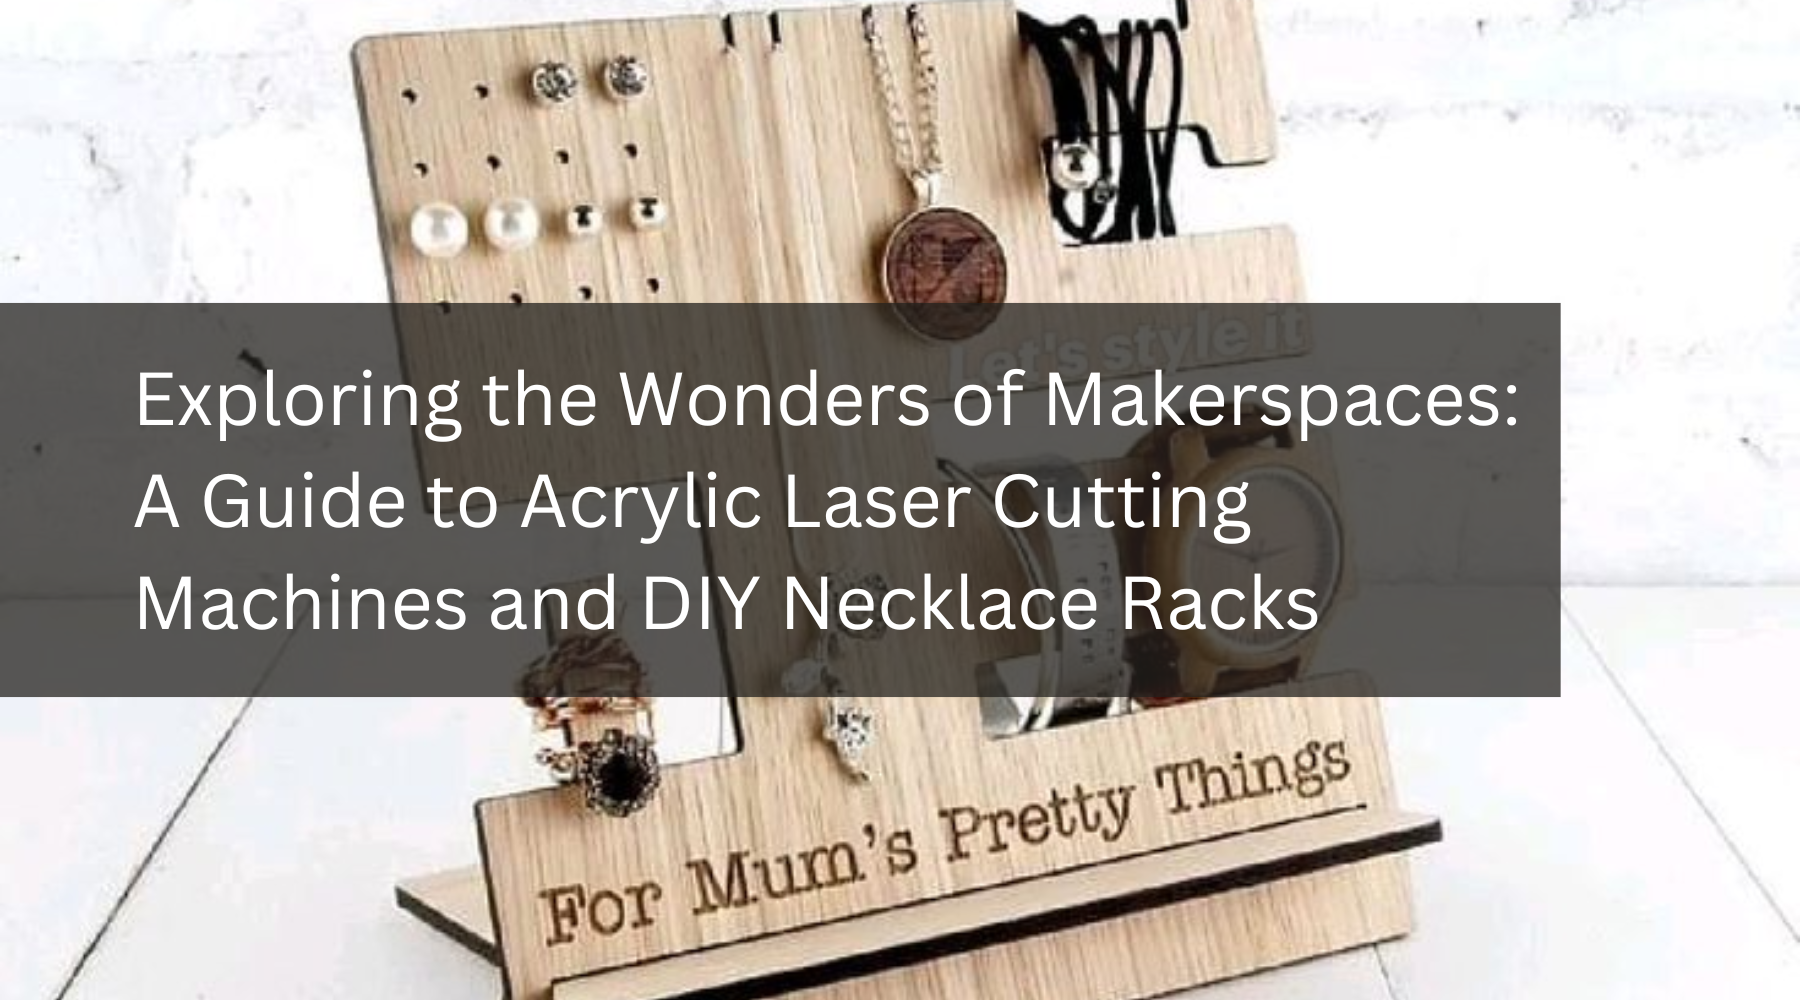 Exploring the Wonders of Makerspaces: A Guide to Acrylic Laser Cutting Machines and DIY Necklace Racks